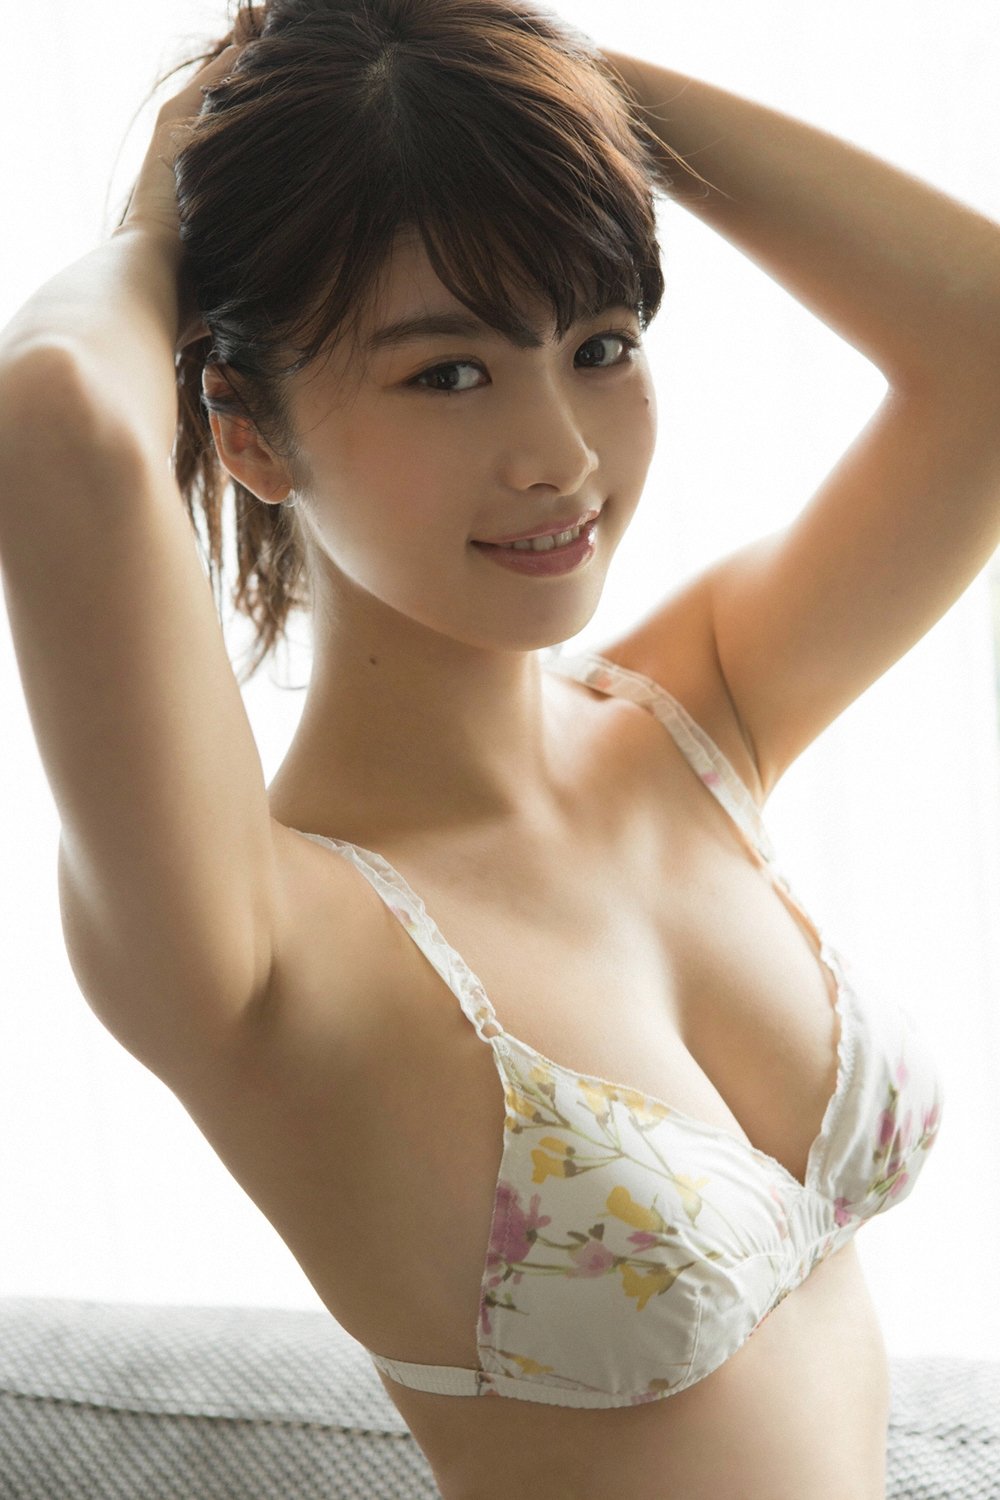 Japanese Actress And Model - Fumika Baba - YS Web Vol.729 - TruePic.net - Picture-80